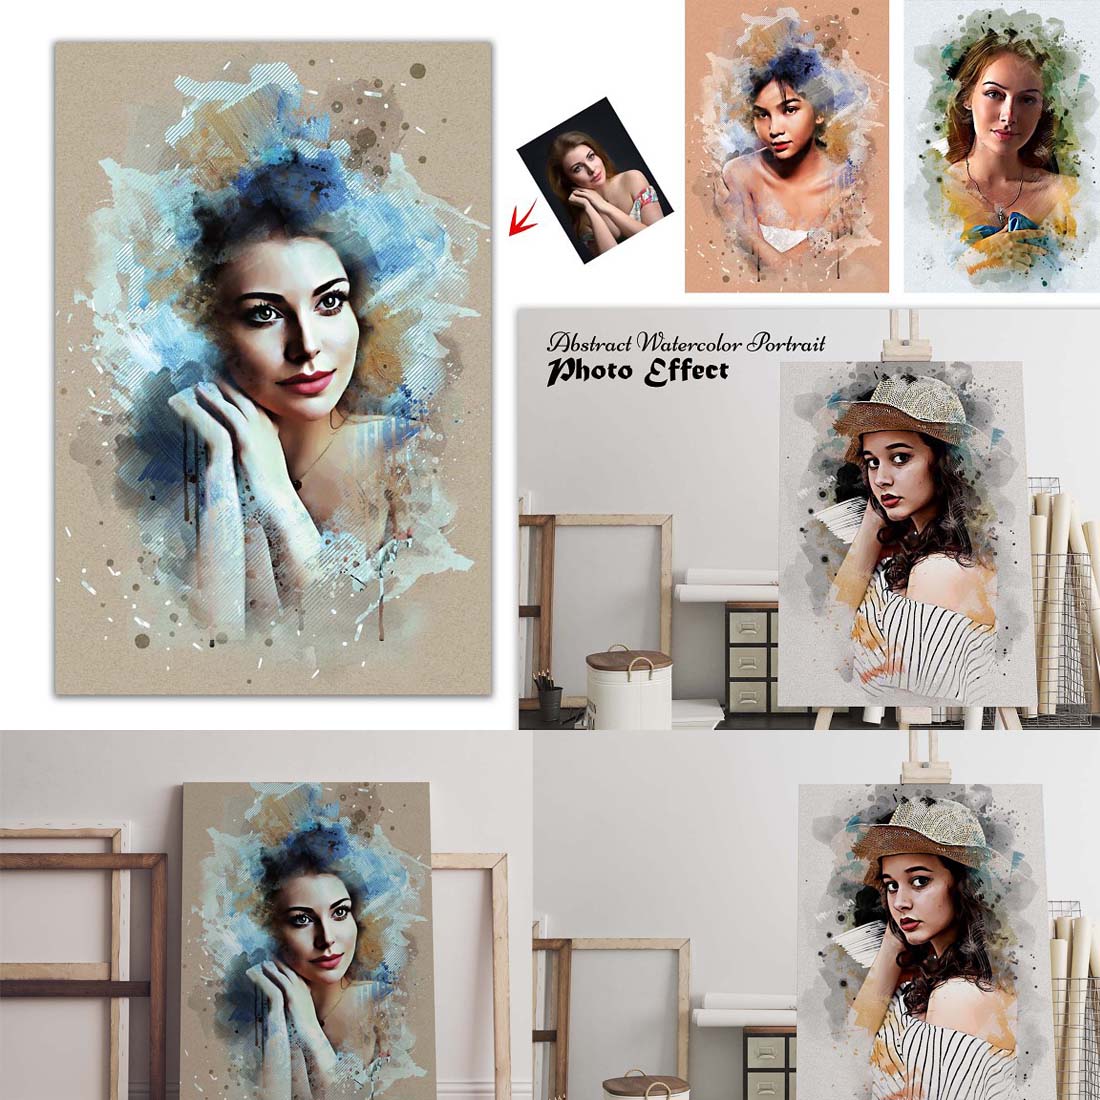 Abstract Watercolor Portrait Effect cover image.